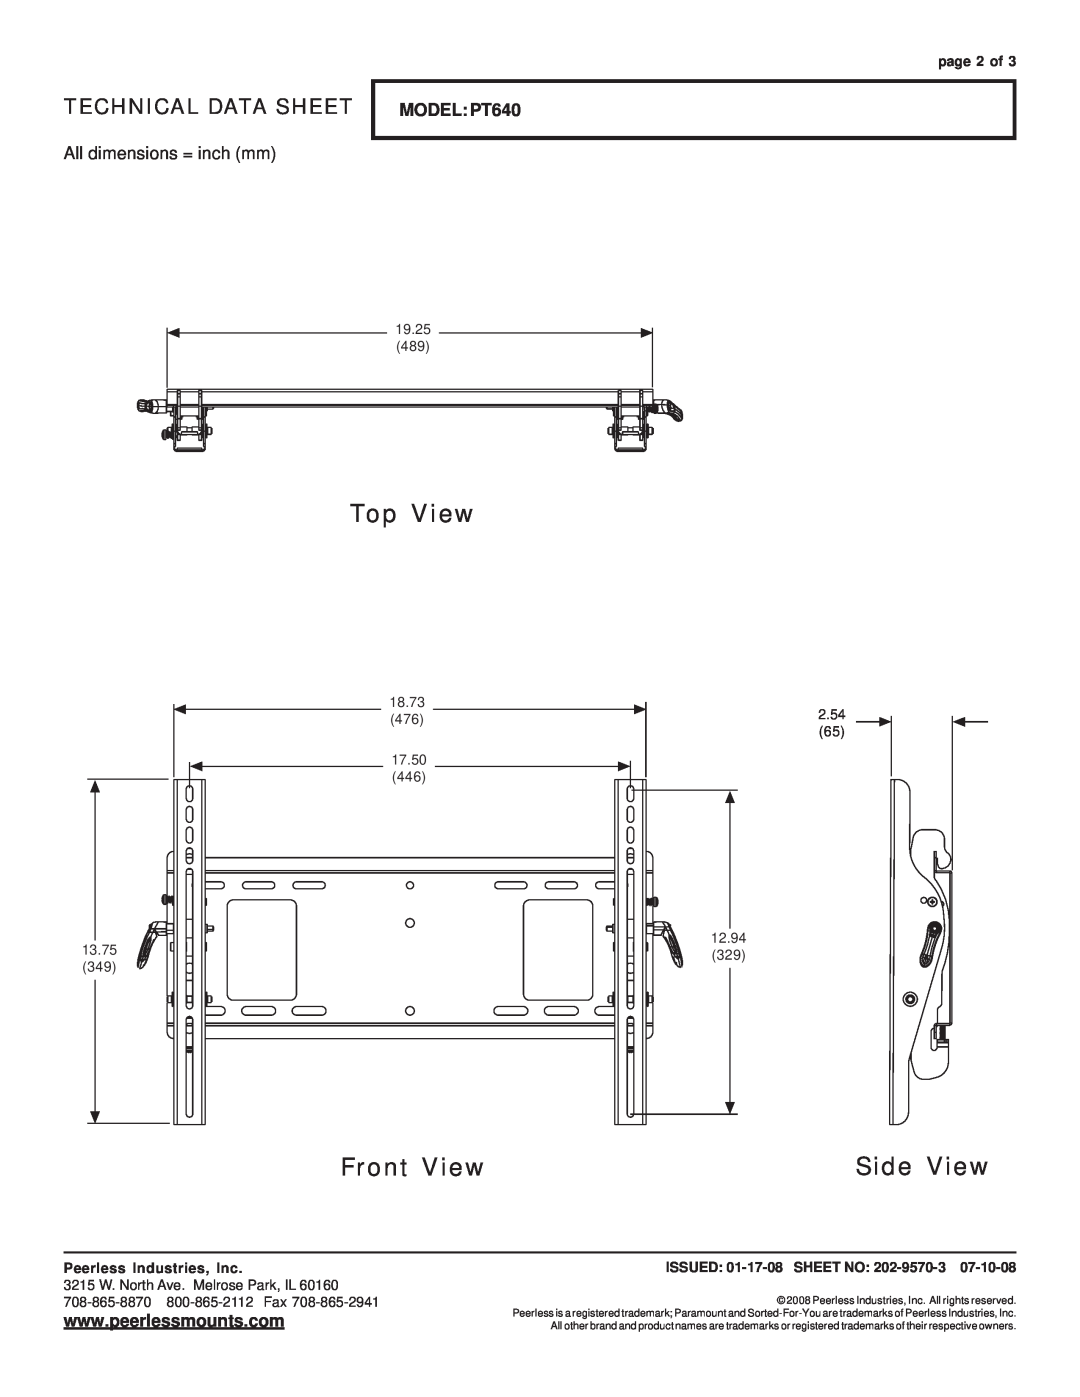 Peerless Industries dimensions Top View, Front View, Side View, Technical Data Sheet, MODEL PT640, page 2 of 